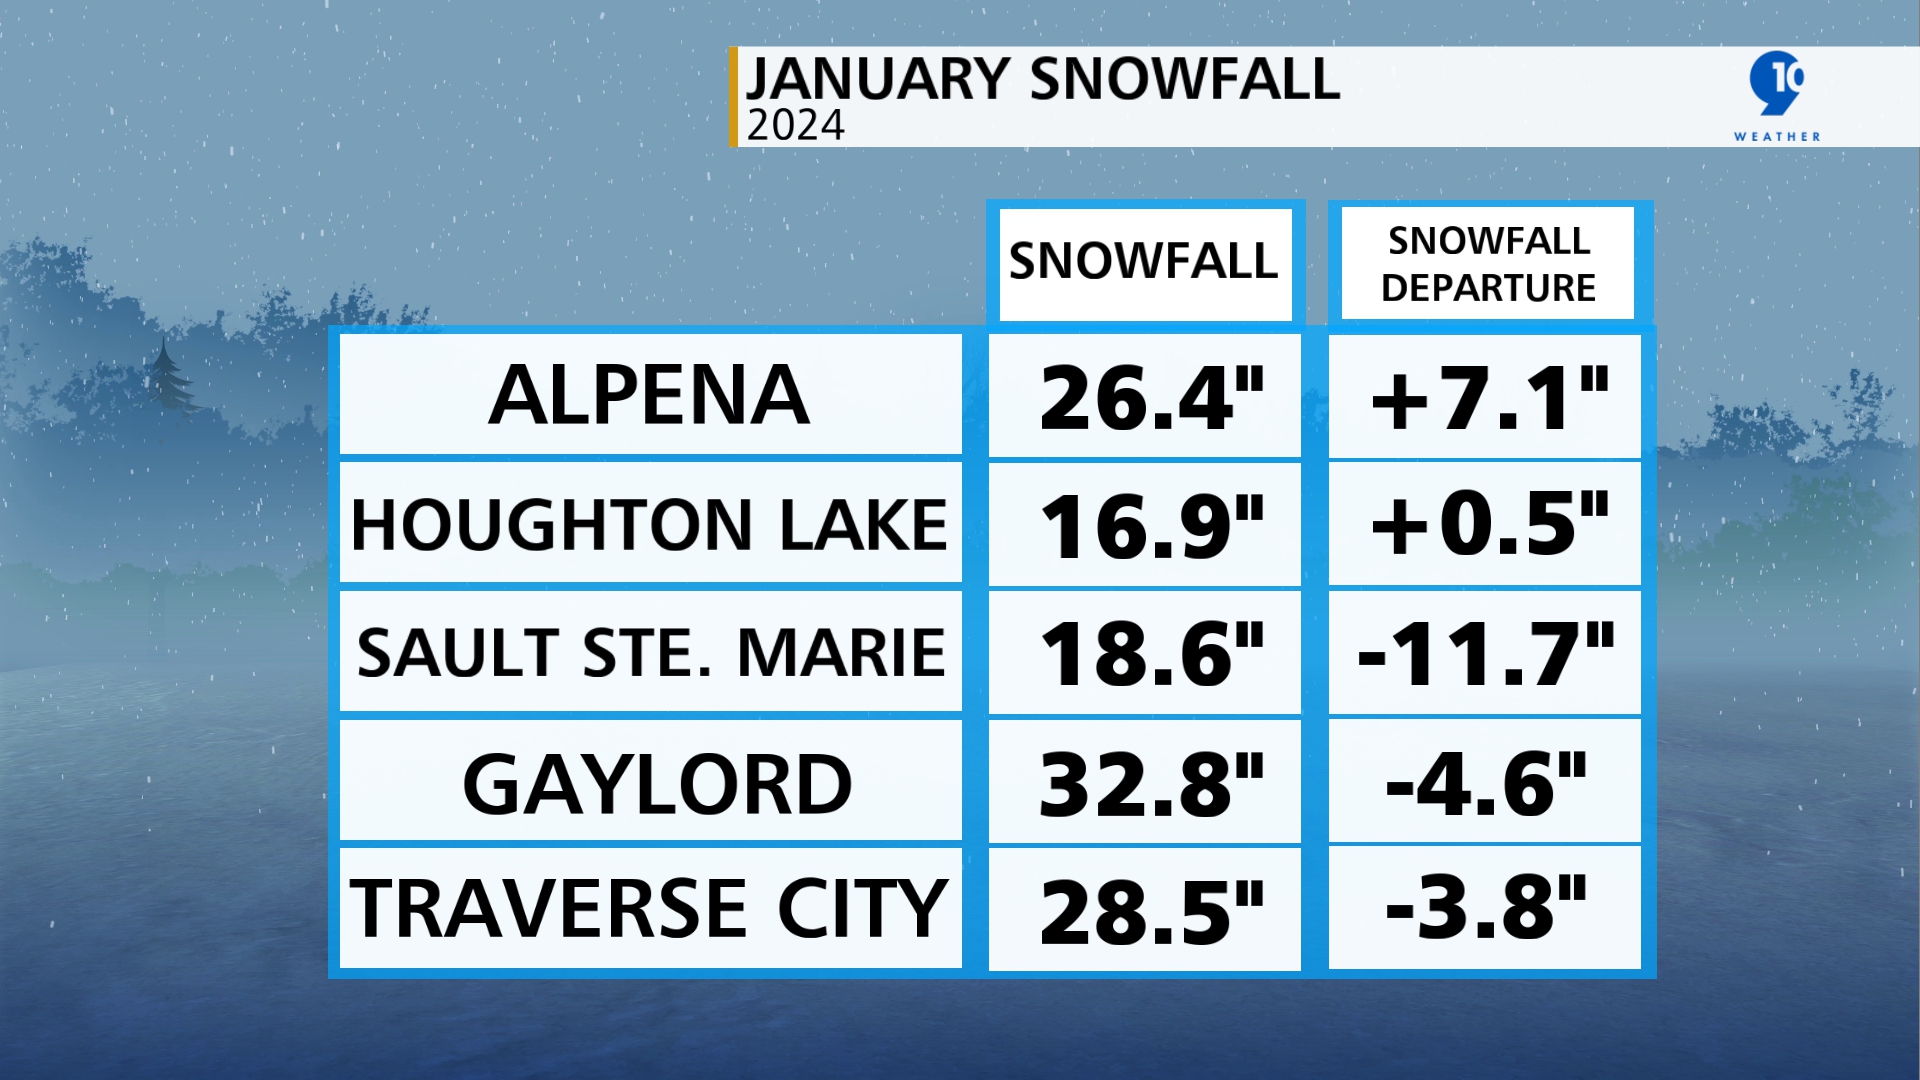 Average Snowfall and Average Snowfall Departure for January 2024